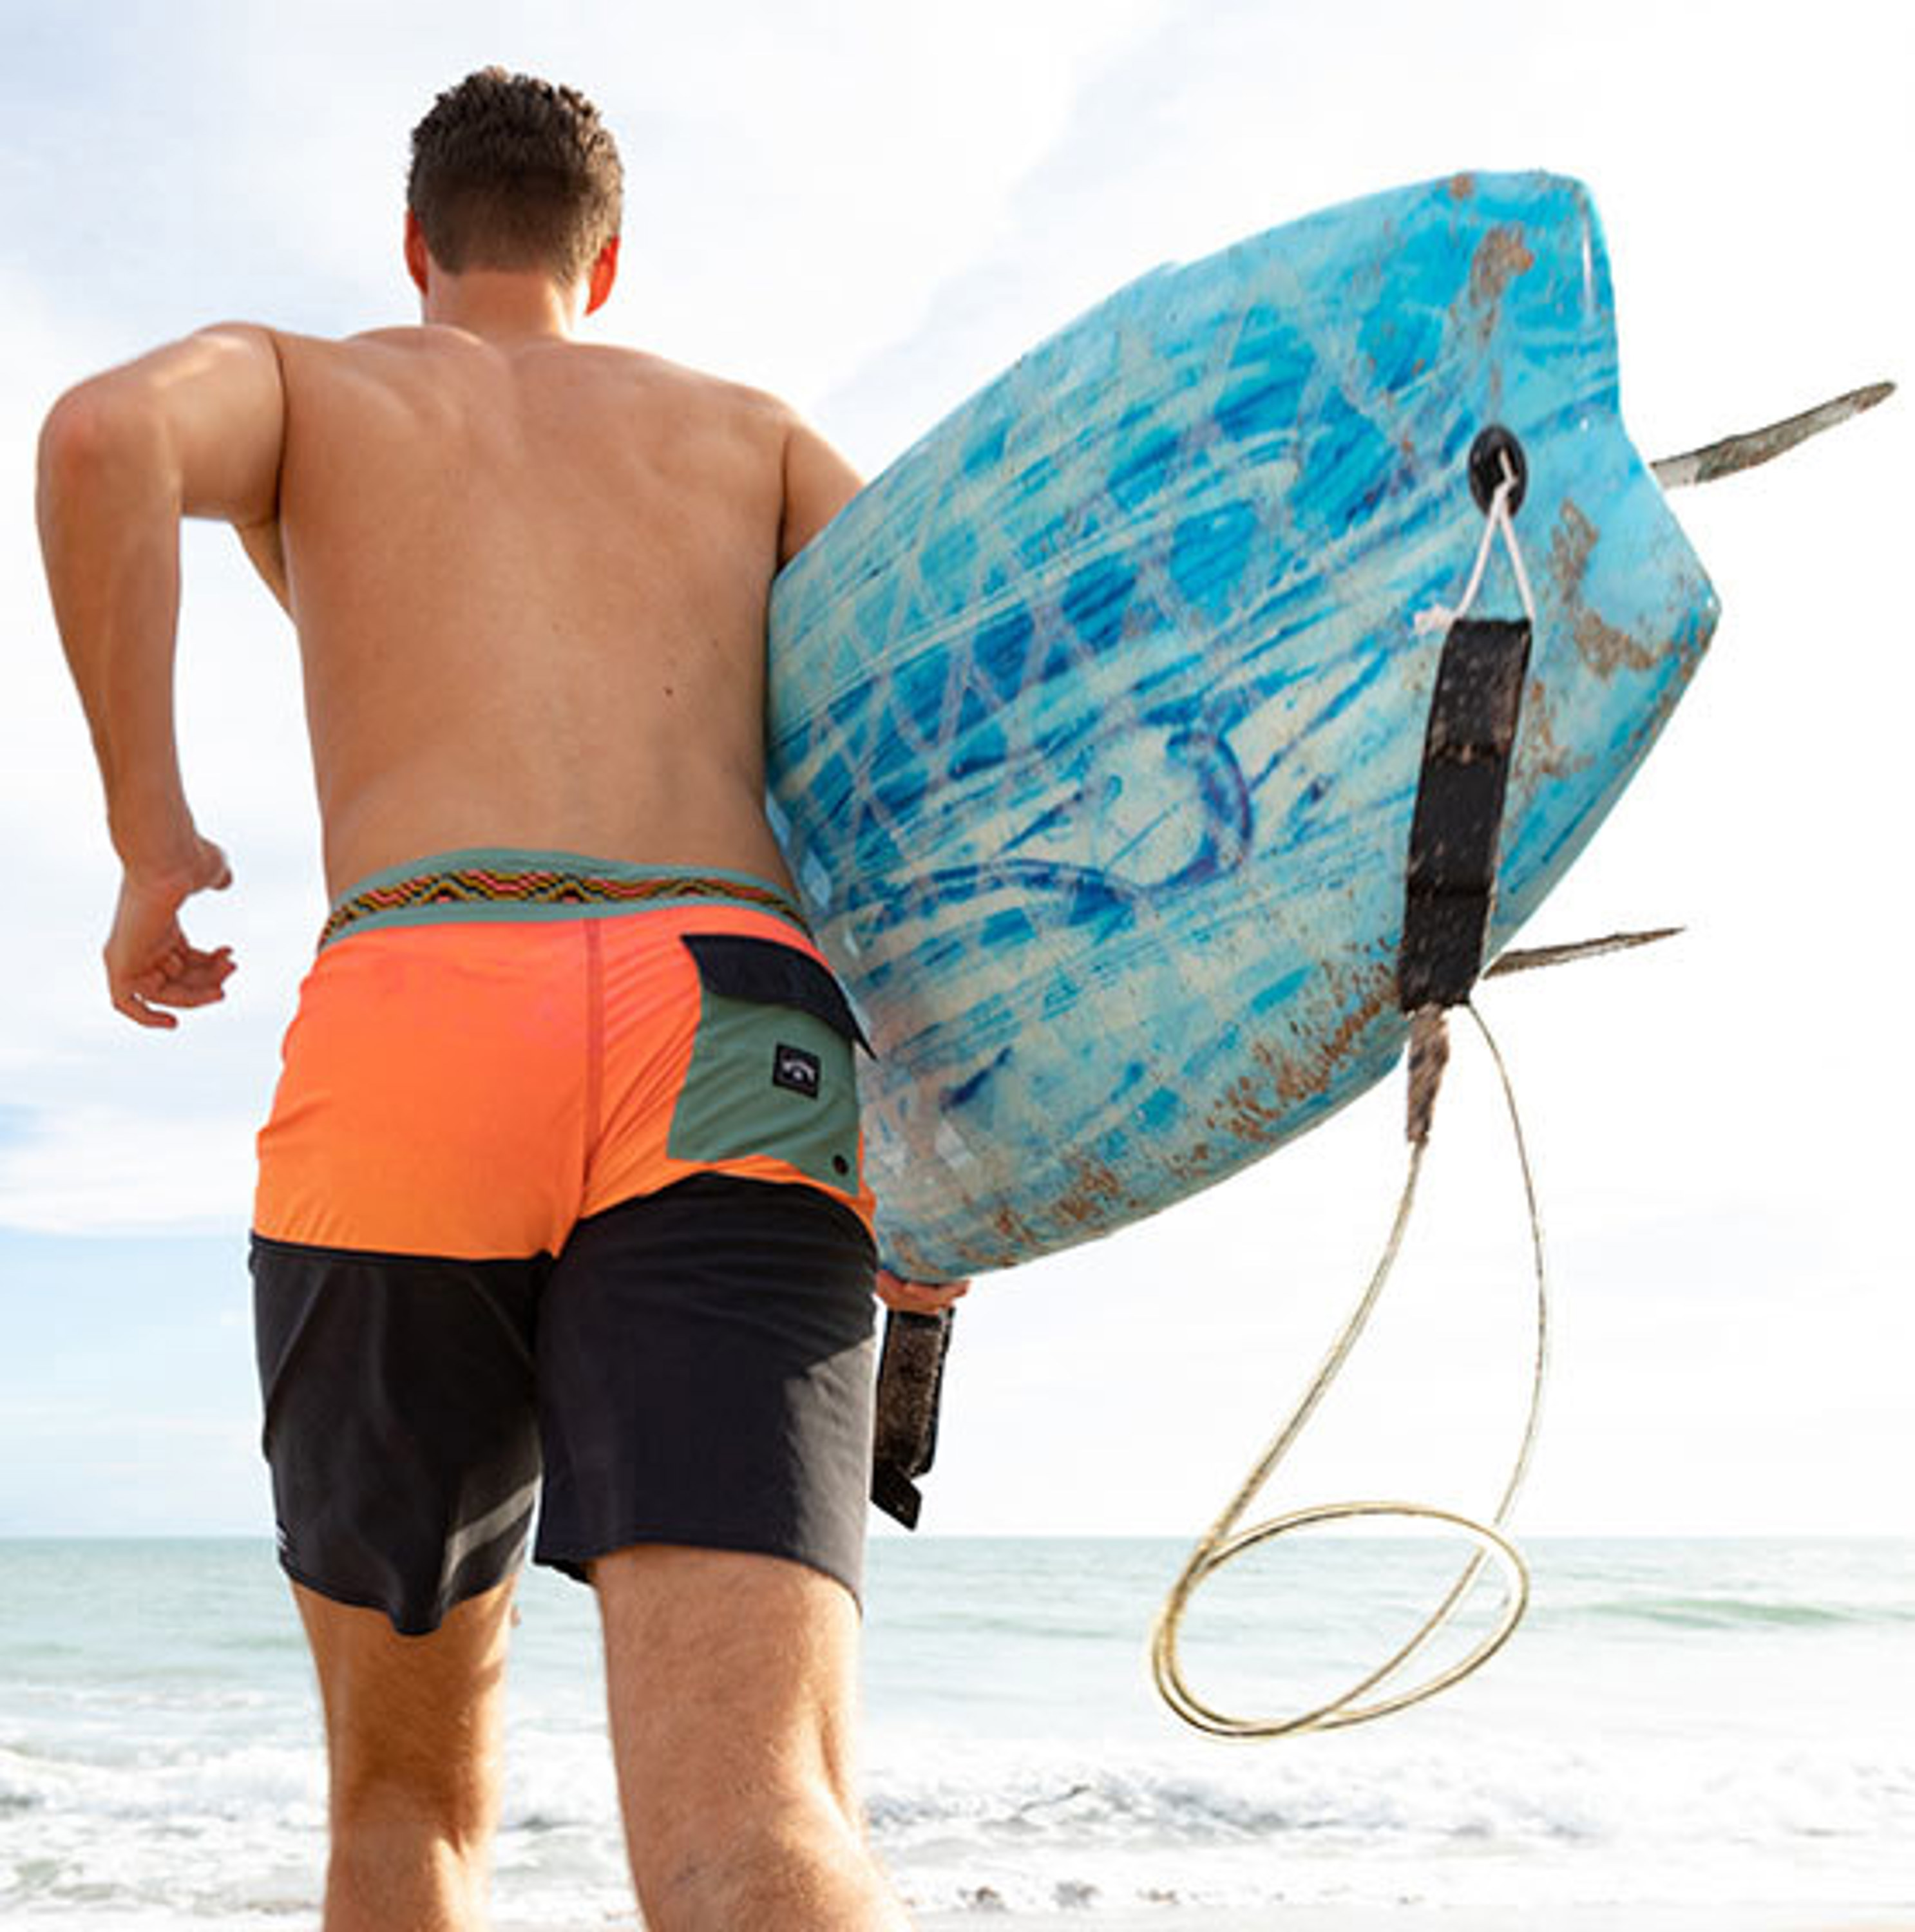 guy carrying surfboard with leash